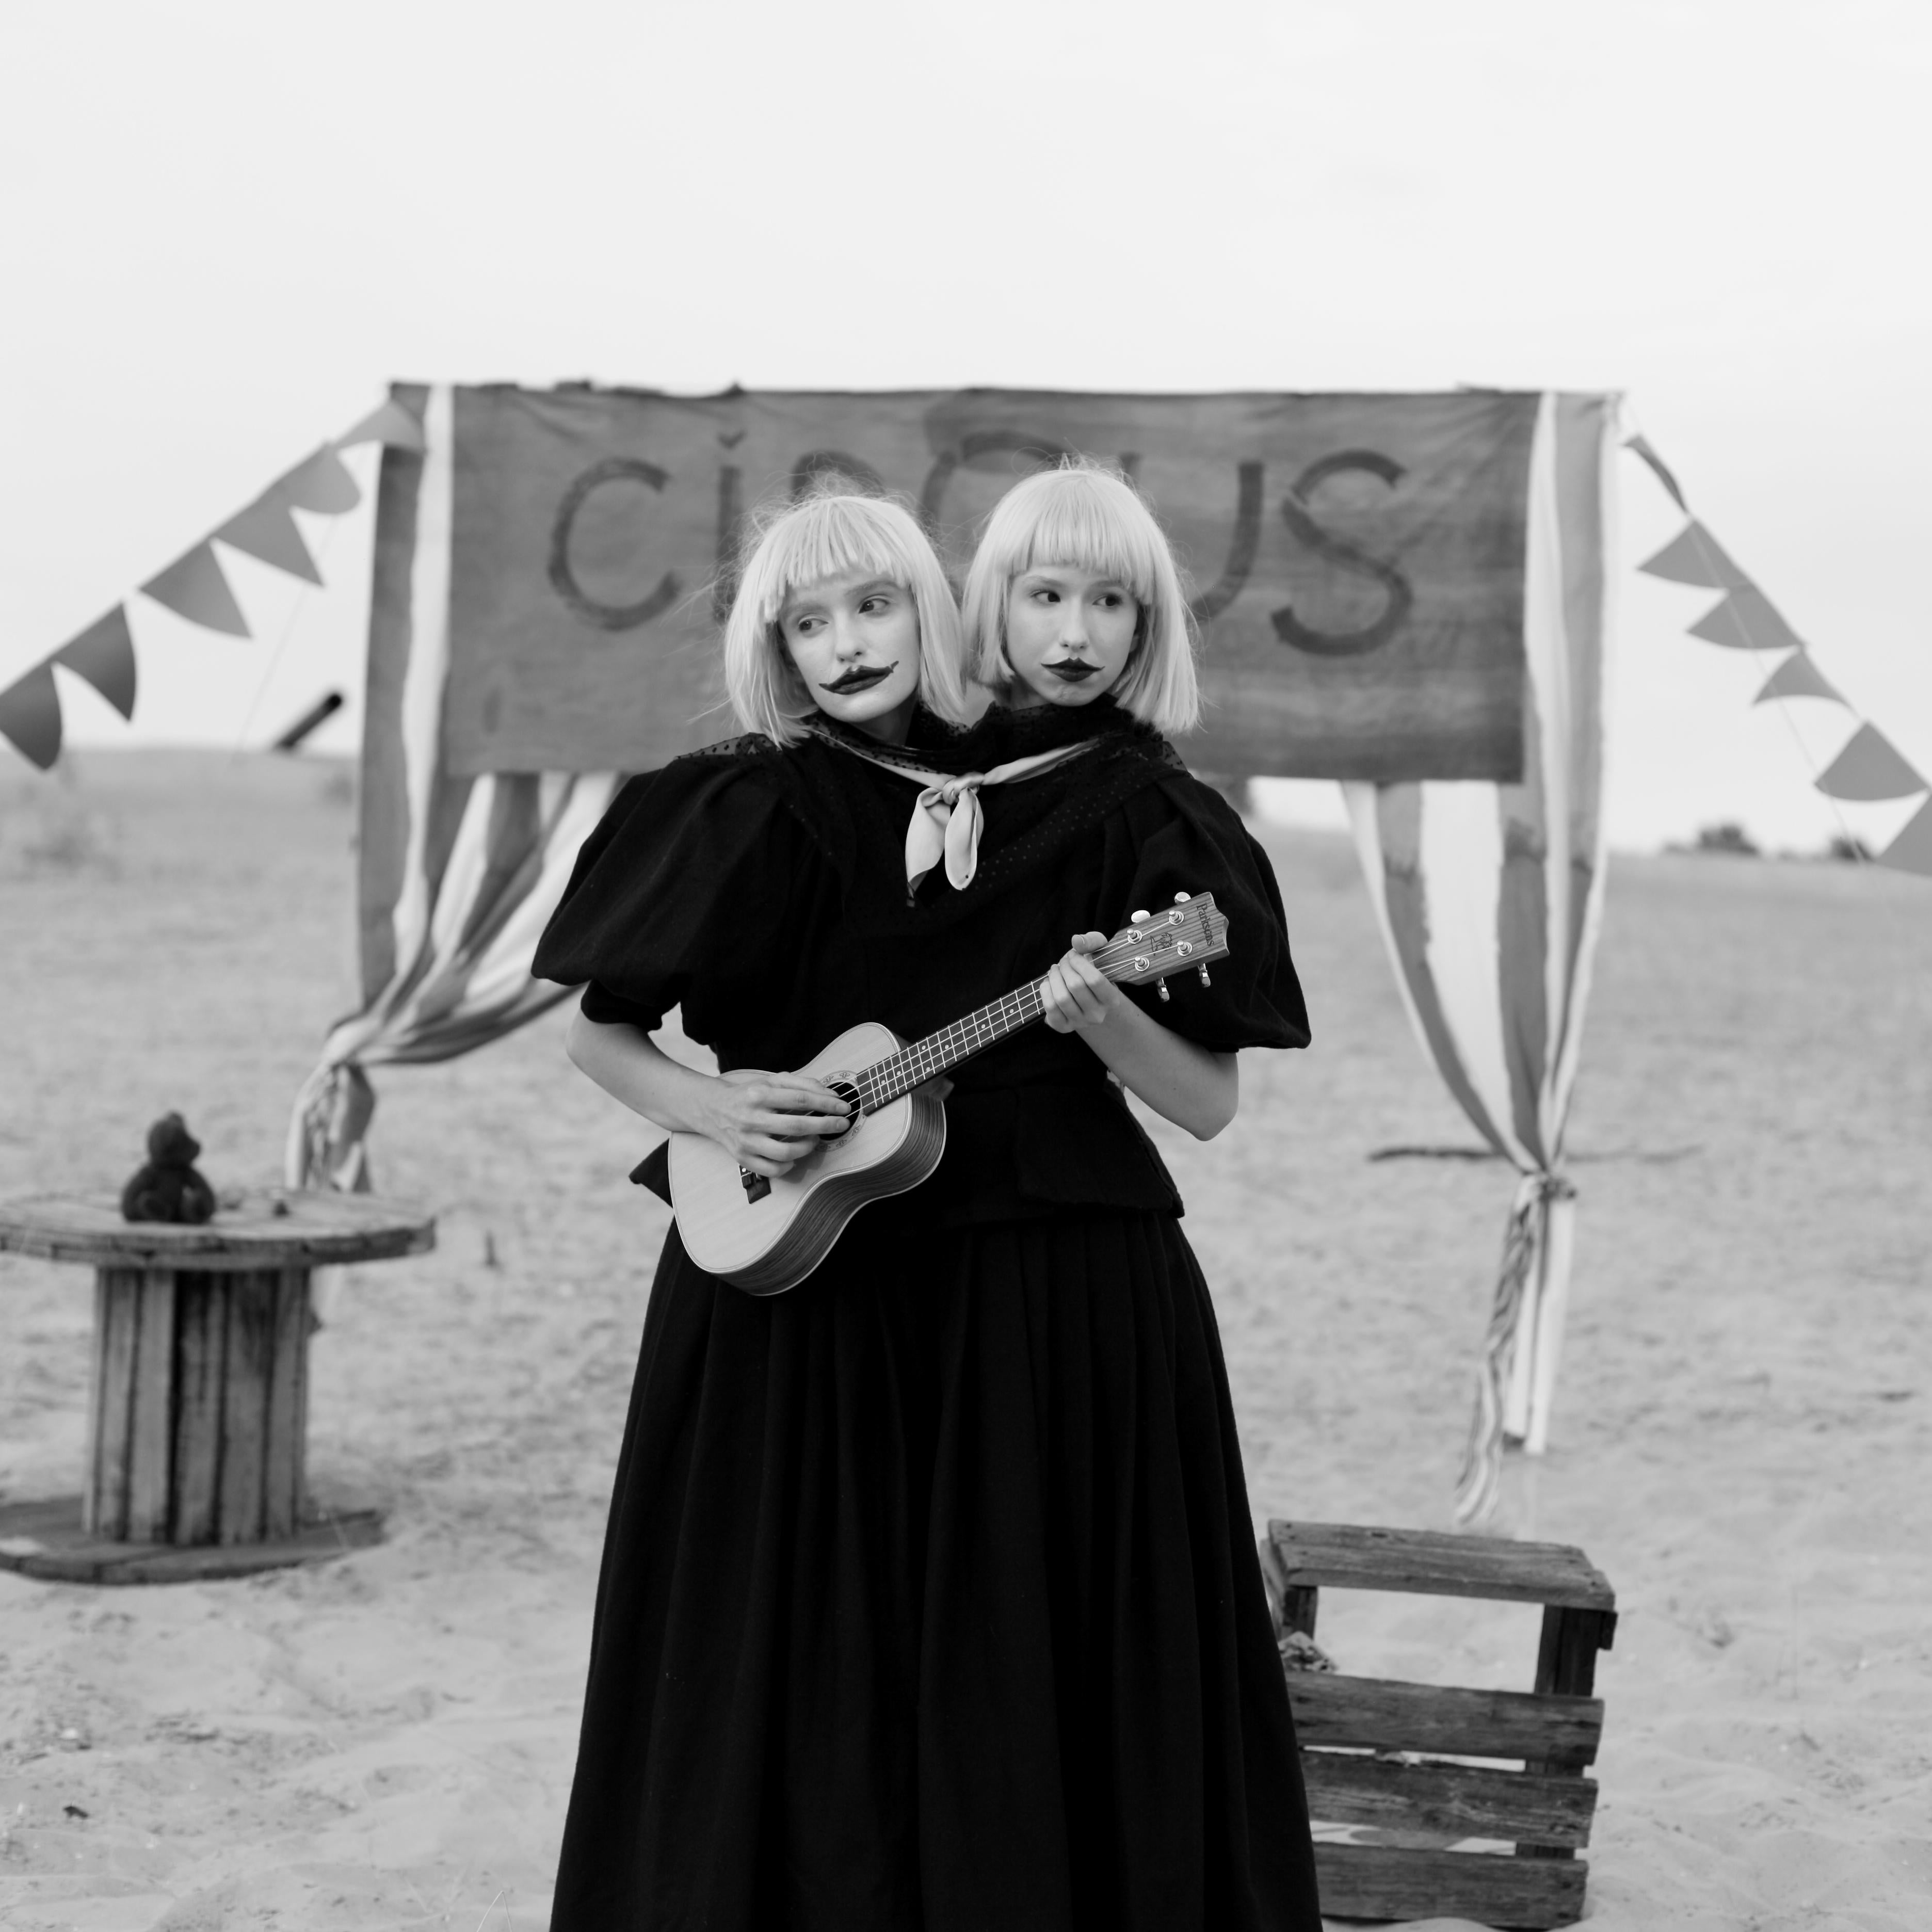 "Sisters (Circus)" Photography 24" x 24" inch Edition of 15 by Olha Stepanian

Printed on Epson Professional Paper 
Signed and numbered by the artist   
Not framed. Ships in a tube.    

Available sizes:			
Edition of 24			16" x 16" inch
Edition of